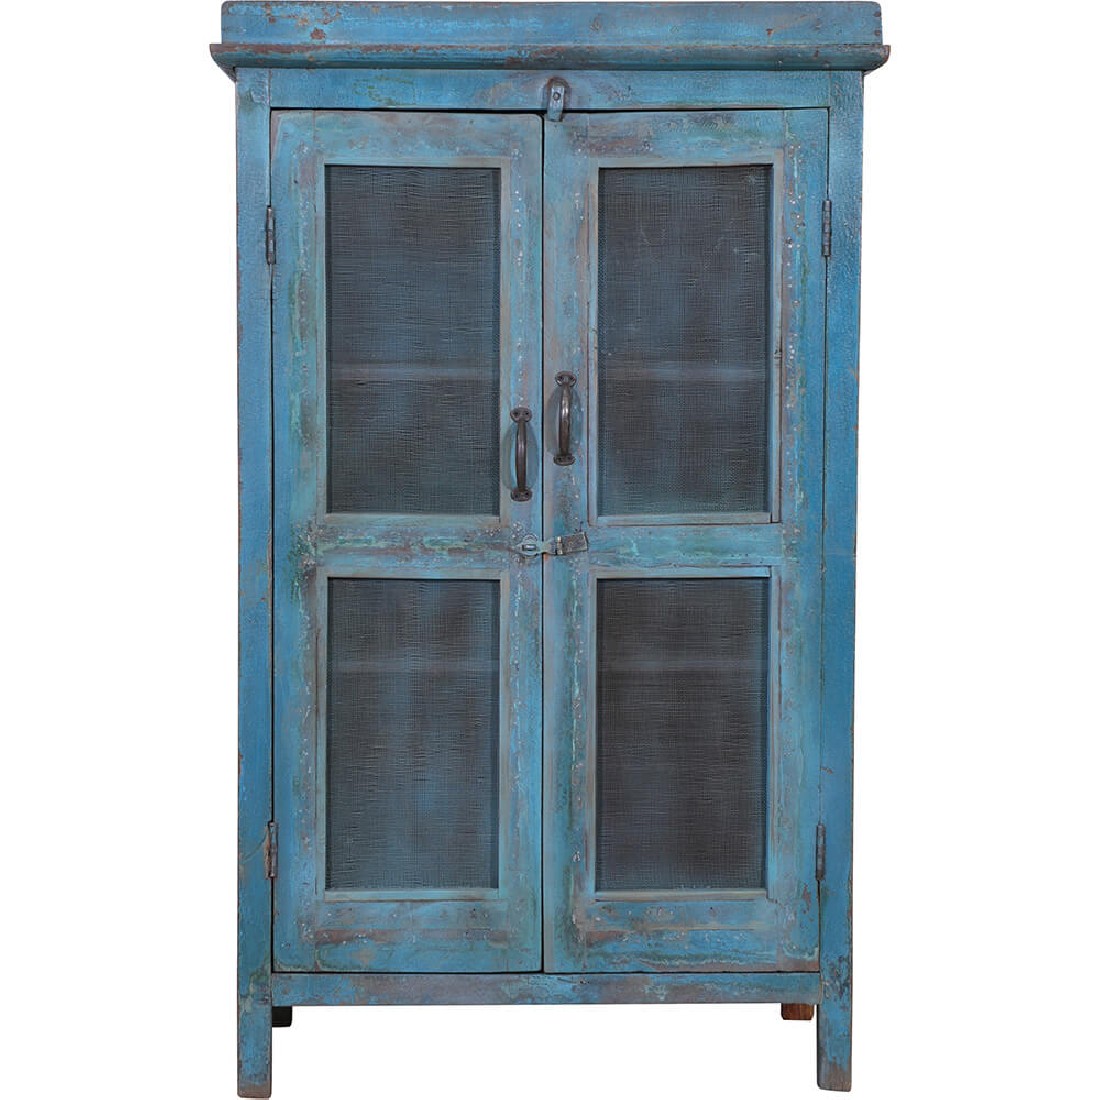 Trademark Blue display cabinet with mesh doors3dhaus.gr